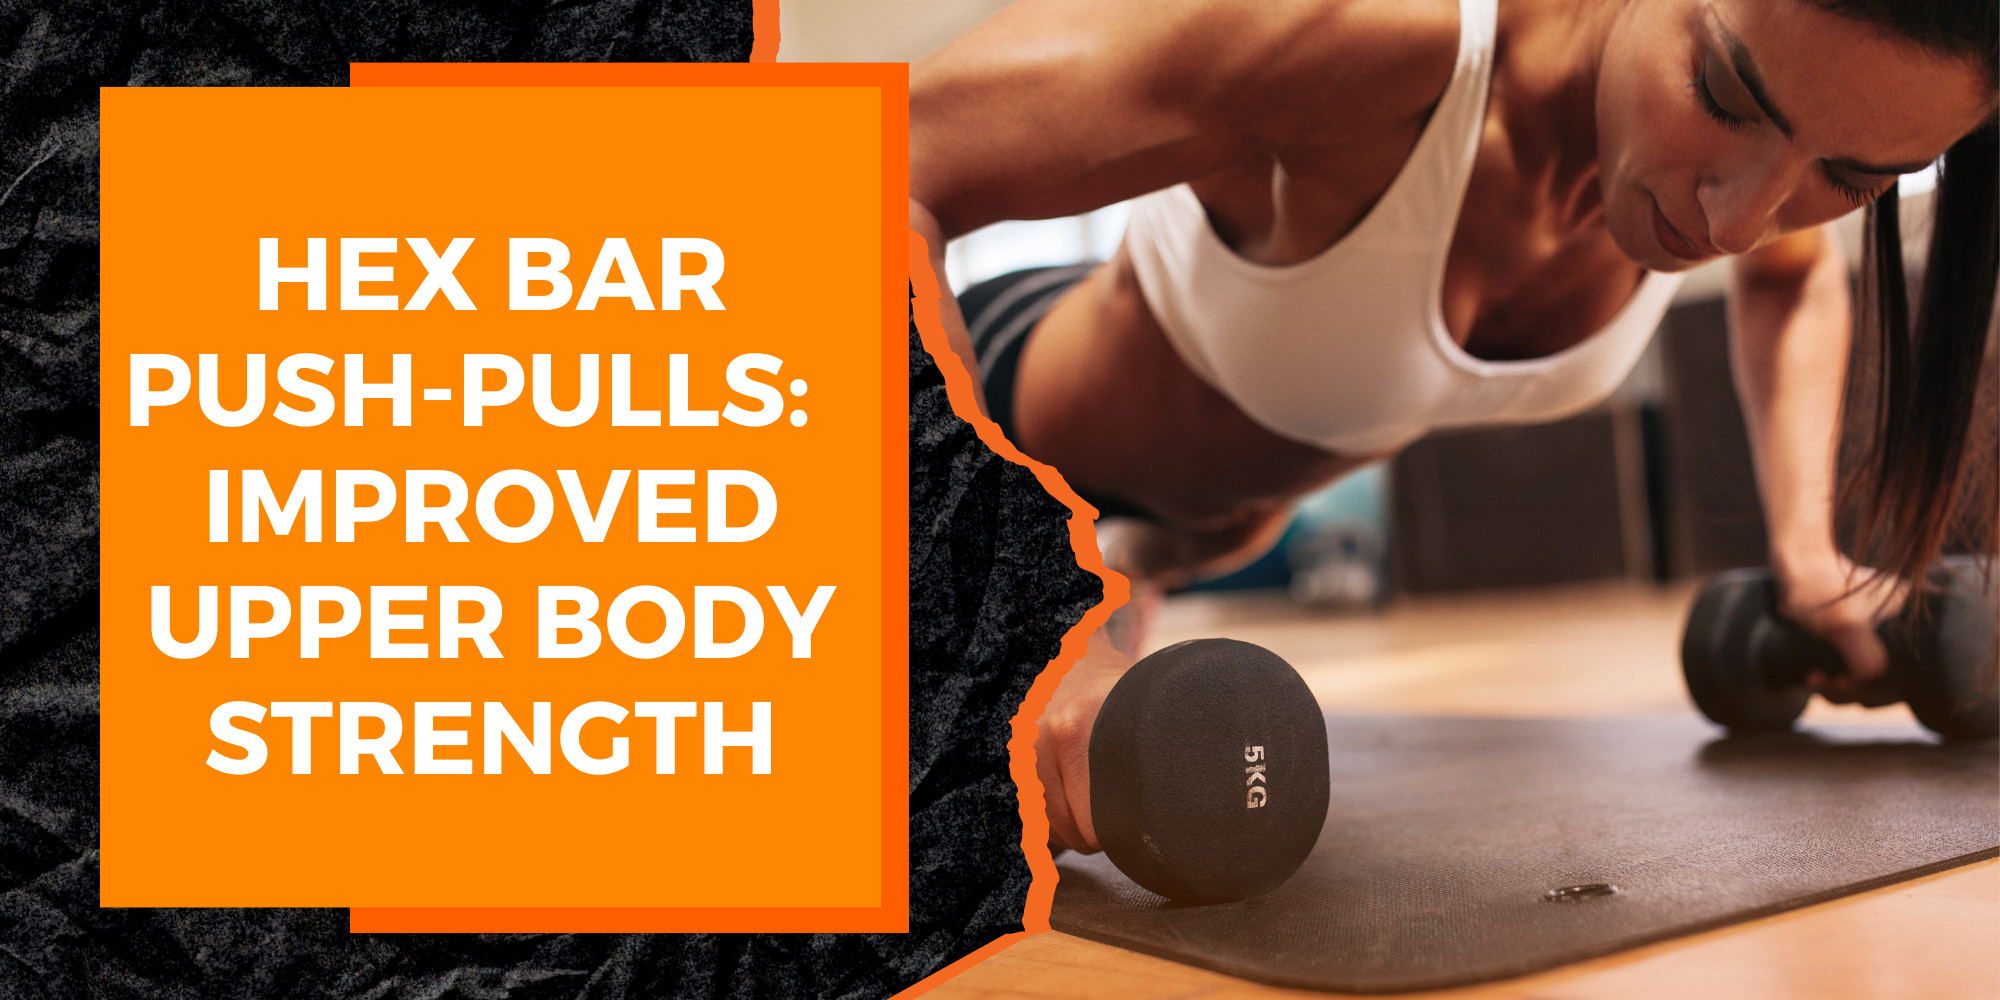 Hex Bar Push-Pulls: An Exercise for Improved Upper Body Strength